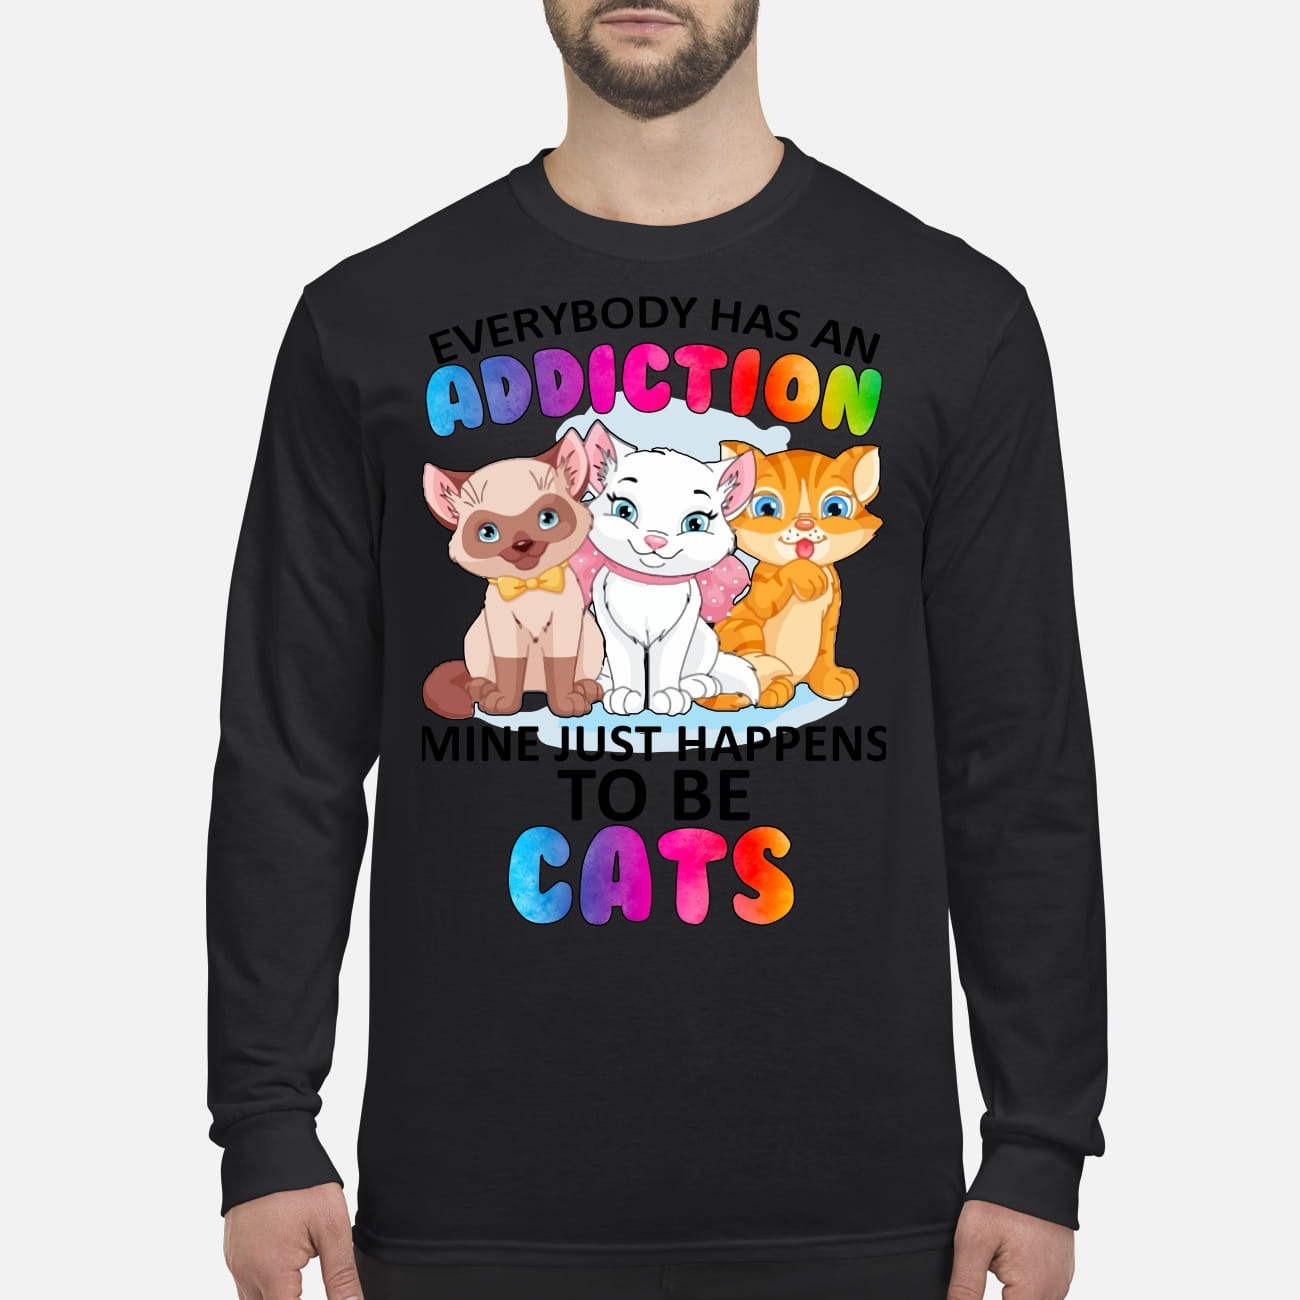 Everybody has an addiction mine just happens to be cats men's long sleeved shirt